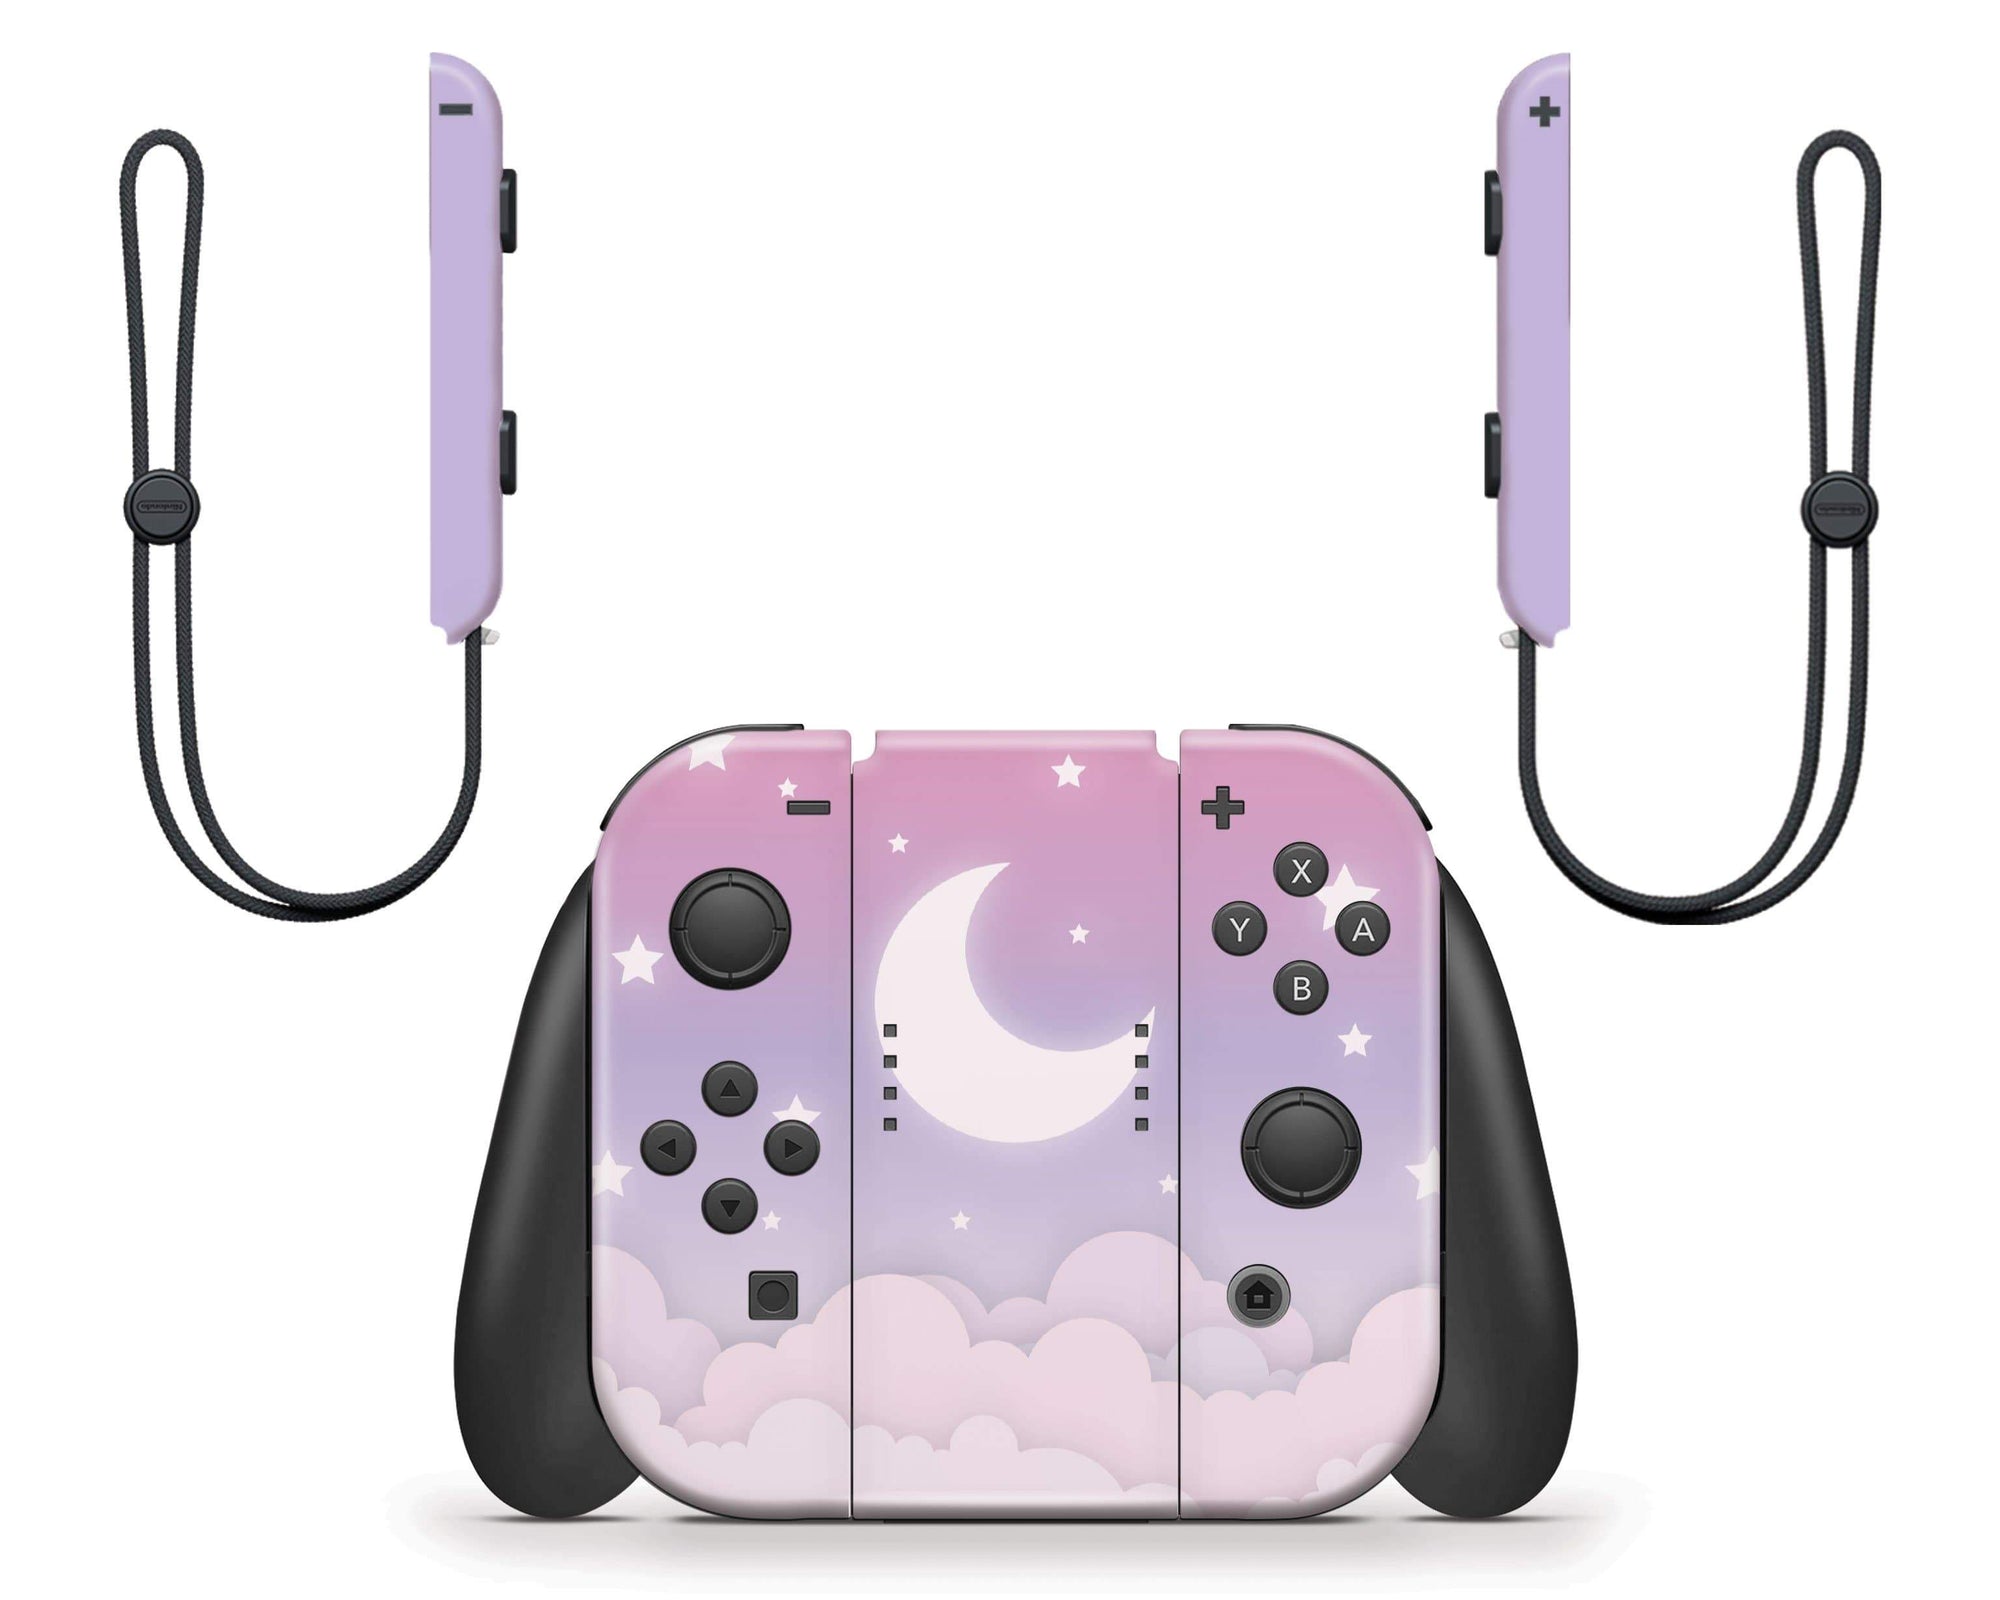 Legendary Painting Carrying Case - Switch, Switch OLED - StickyBunny